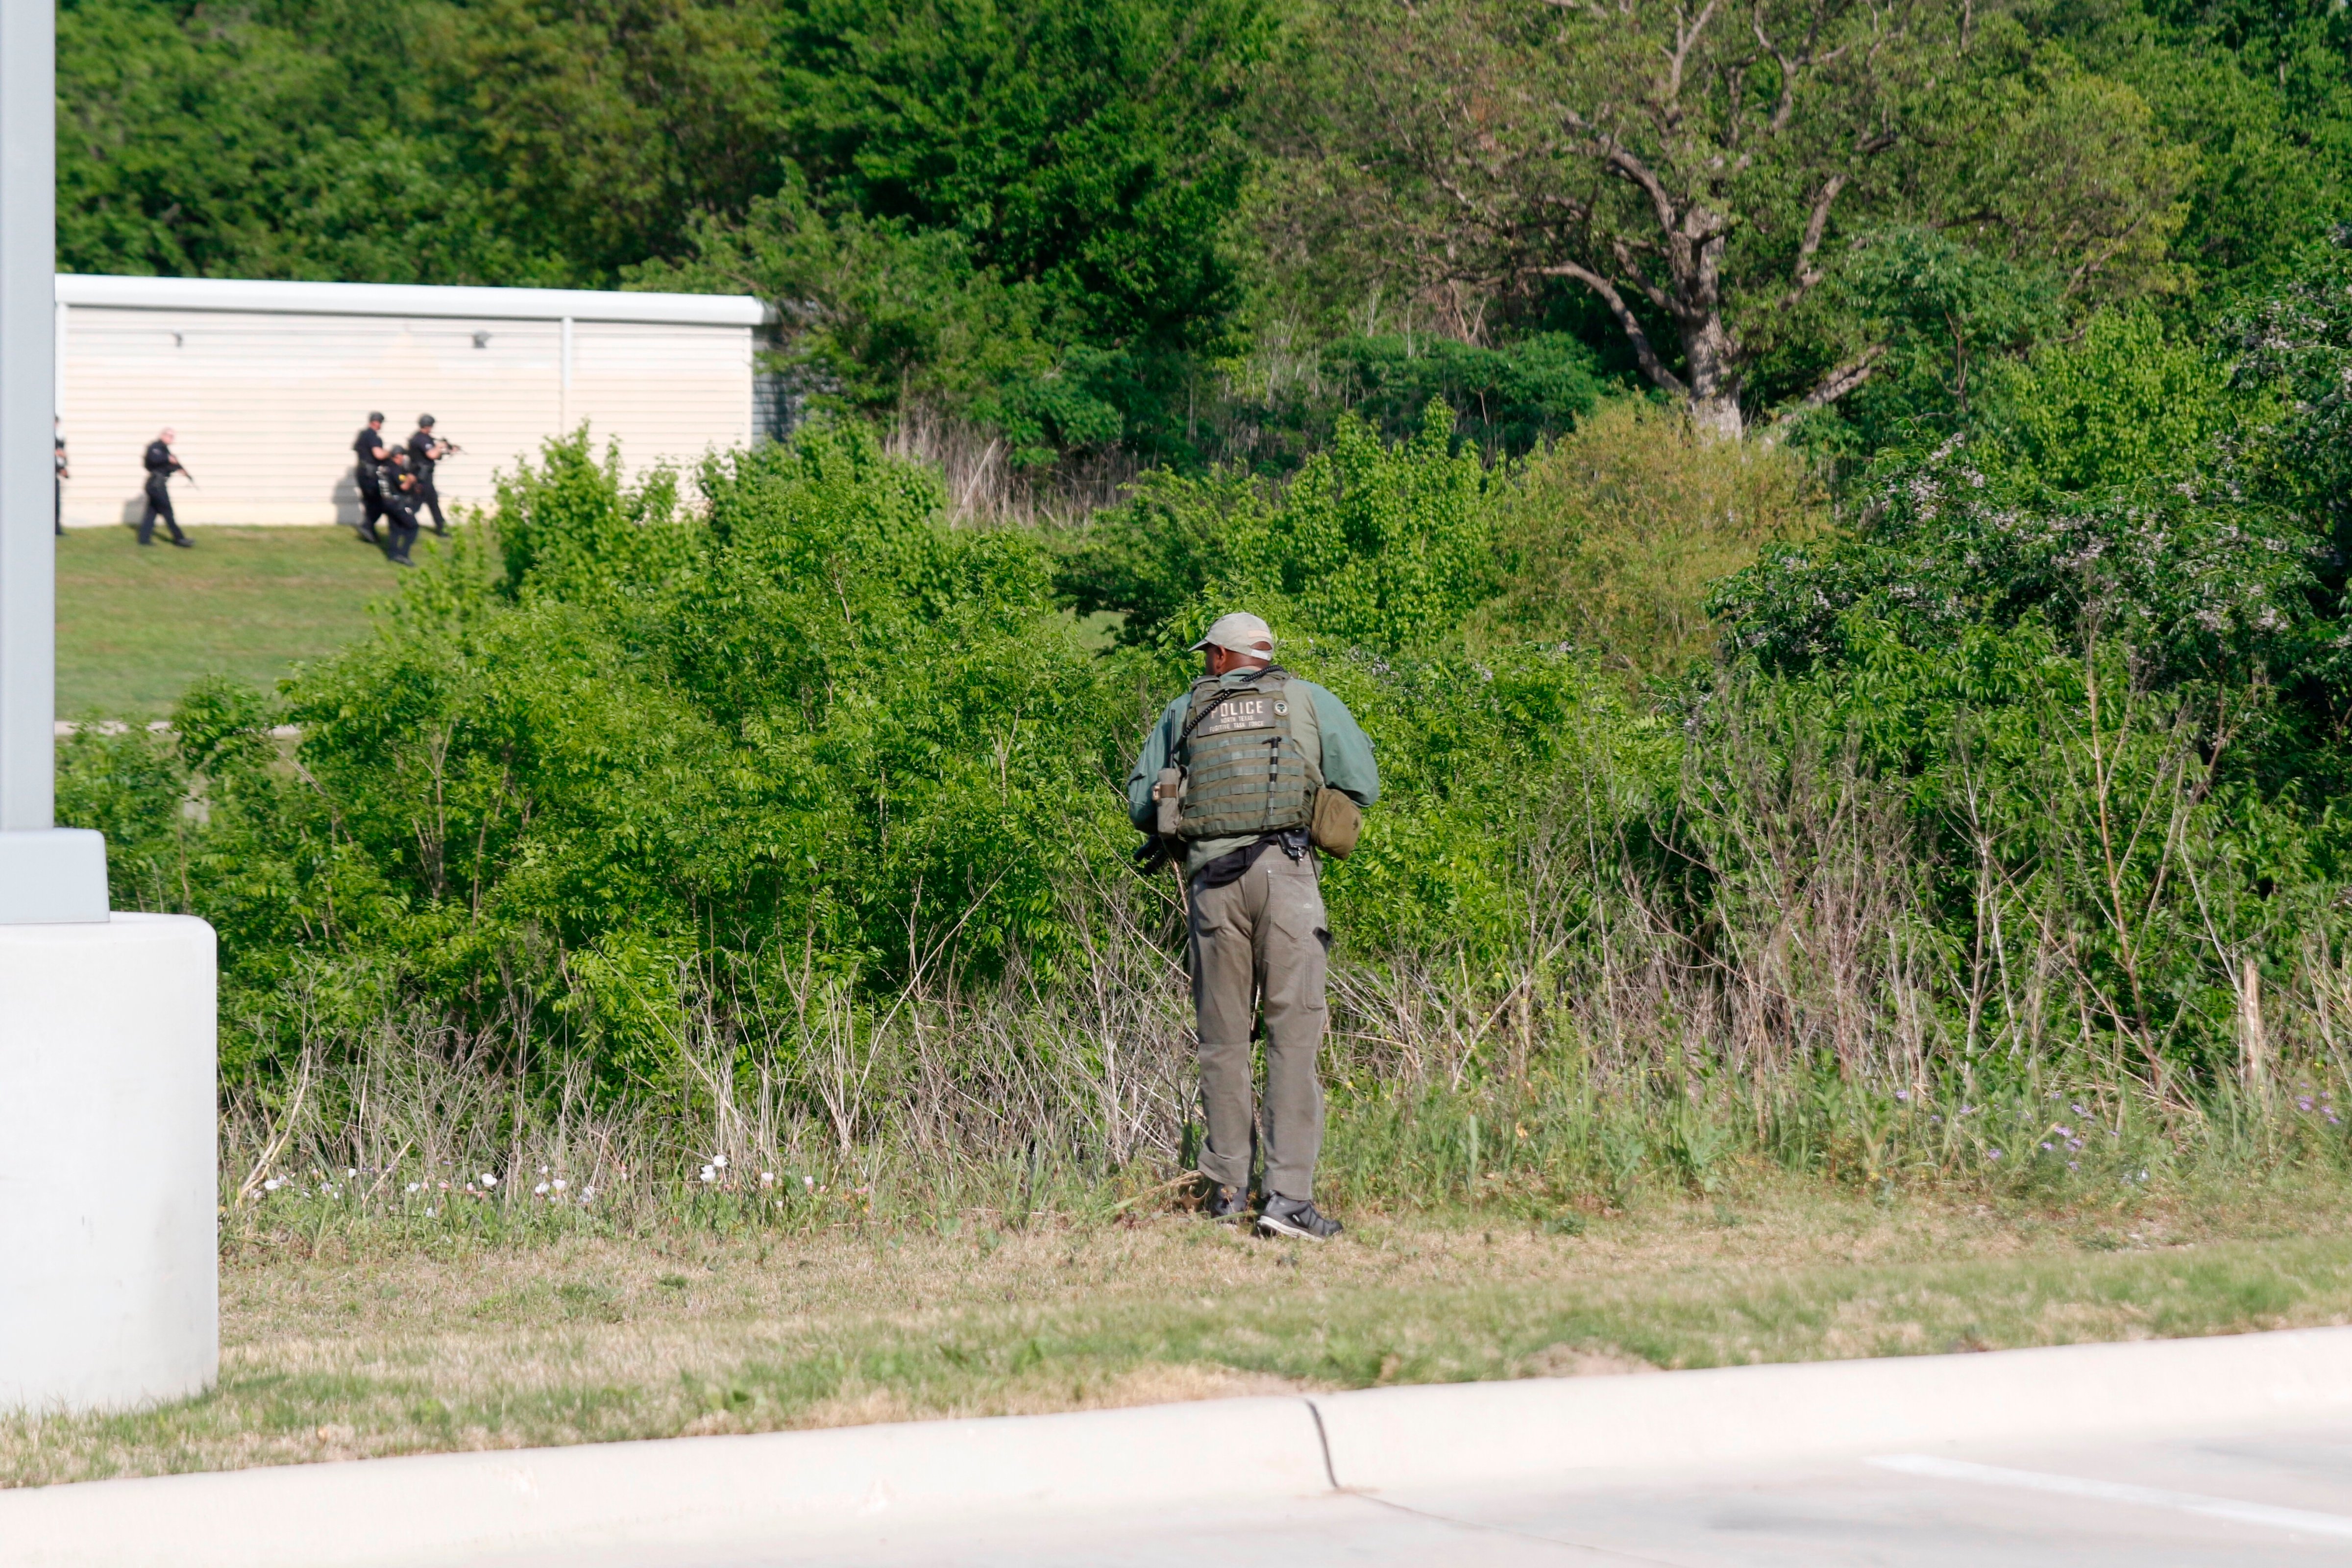 Dallas Police look for a suspect in the shooting of two police officers and a civilian Tuesday, April, 24,2018. Police are near ExtraSpace Storage, south of The Home Depot. Officer in the foreground is behind the Key-Whitman Eye Center on Central Expressway. (Ron Baselice/The Dallas Morning News via AP) (Ron Baselice—AP)